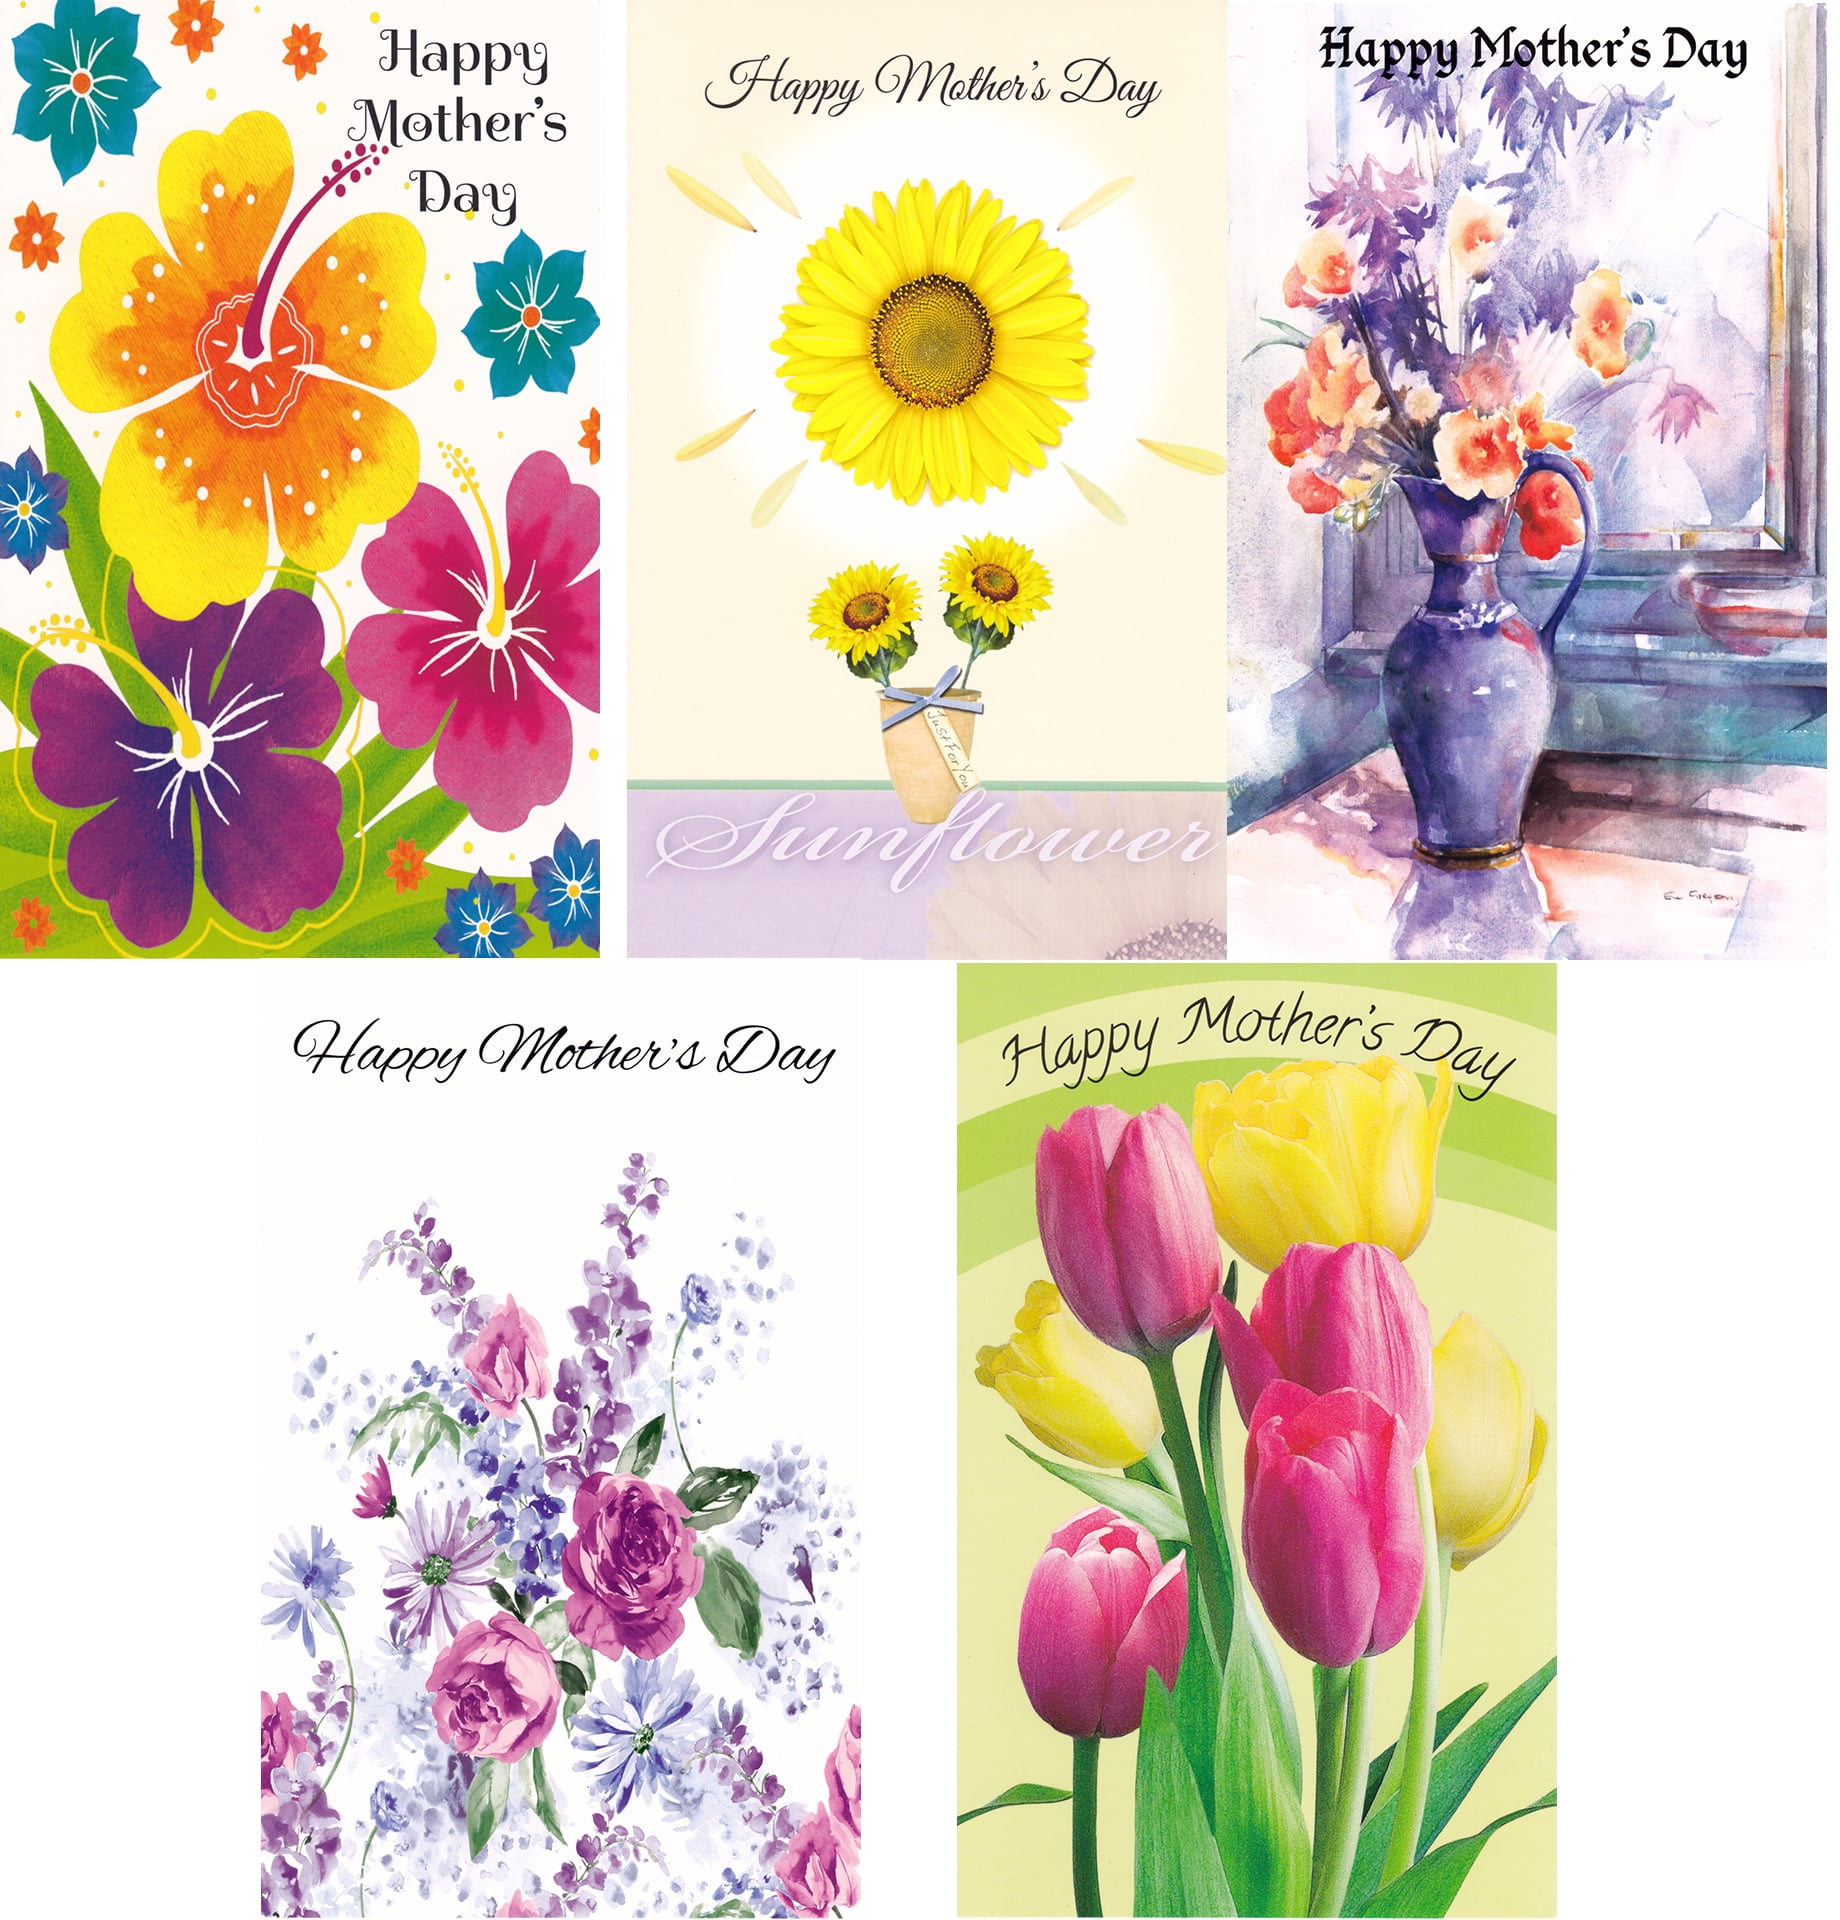 Happy Mother’s Day Mother’s Day Greeting Card 